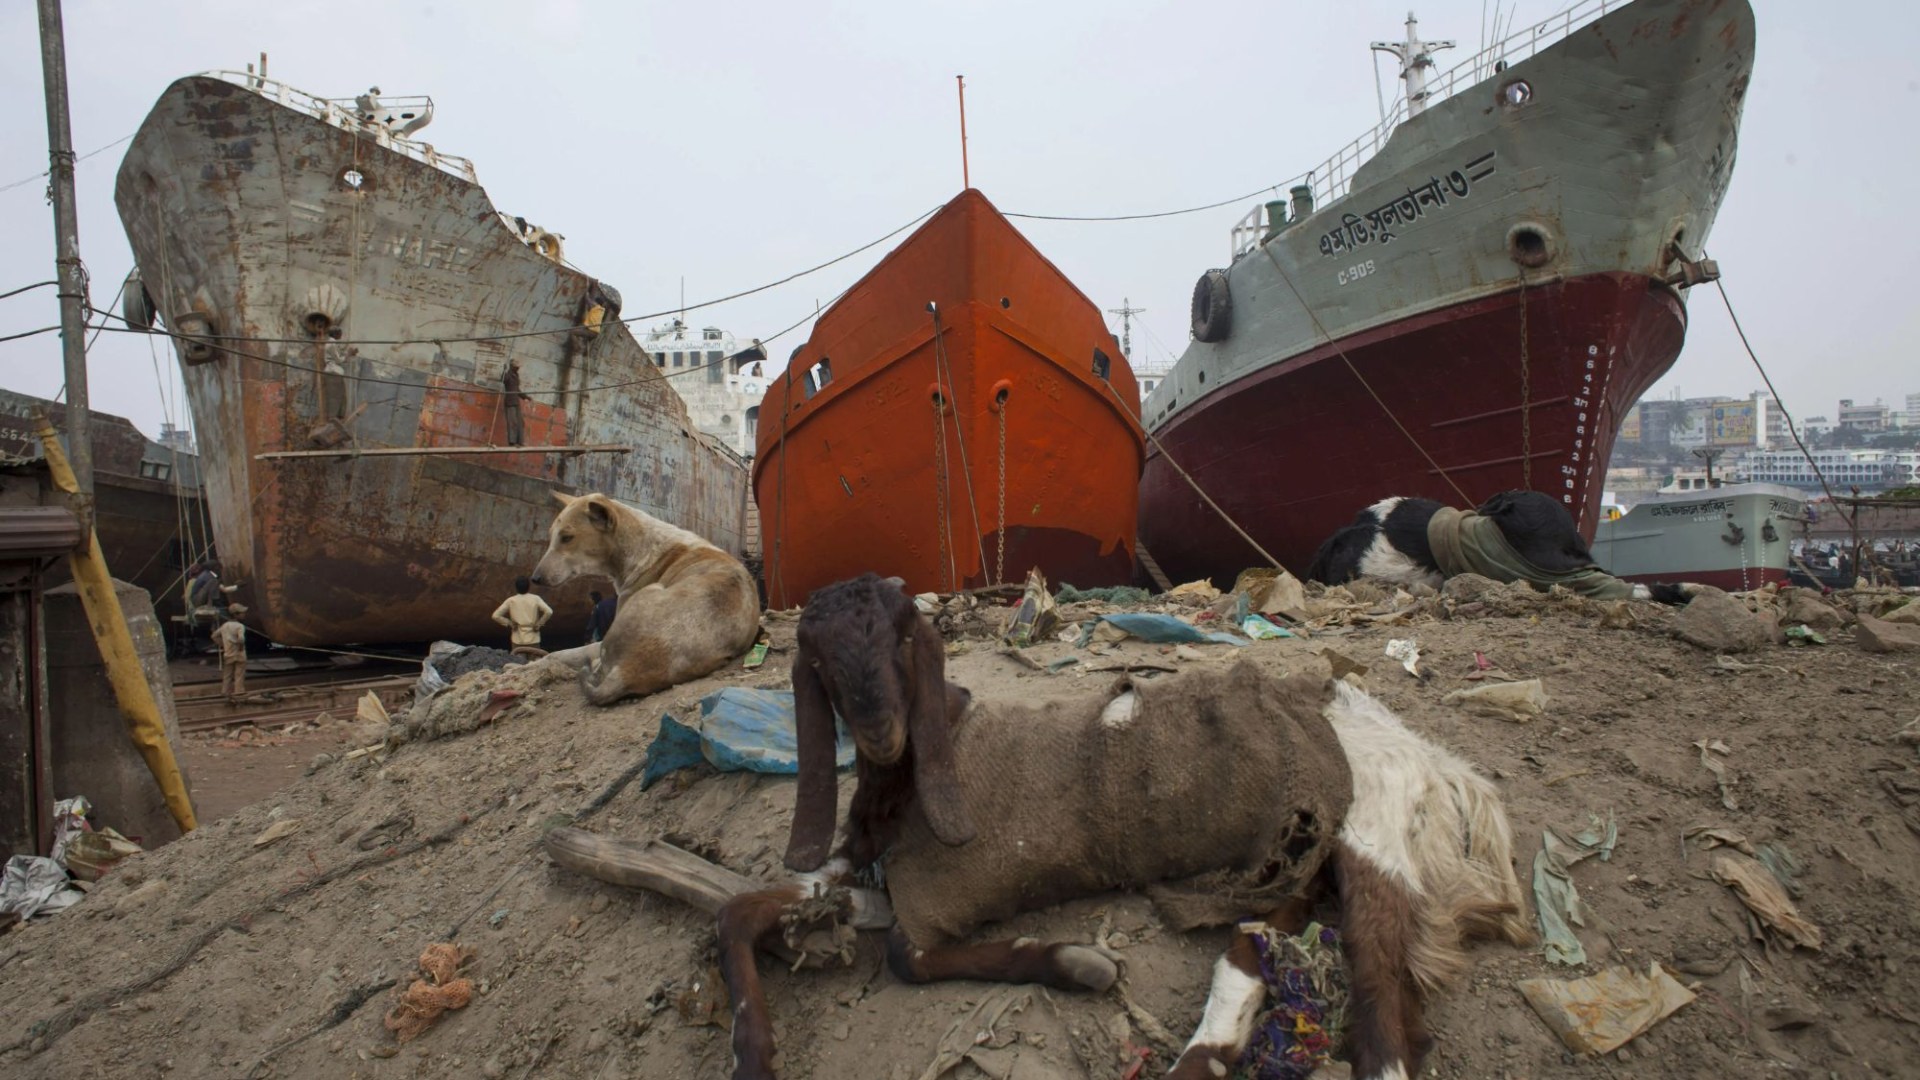 In the haunting graveyard of a ship, where ships rot in horrific conditions and children’slaves” break them by hand.